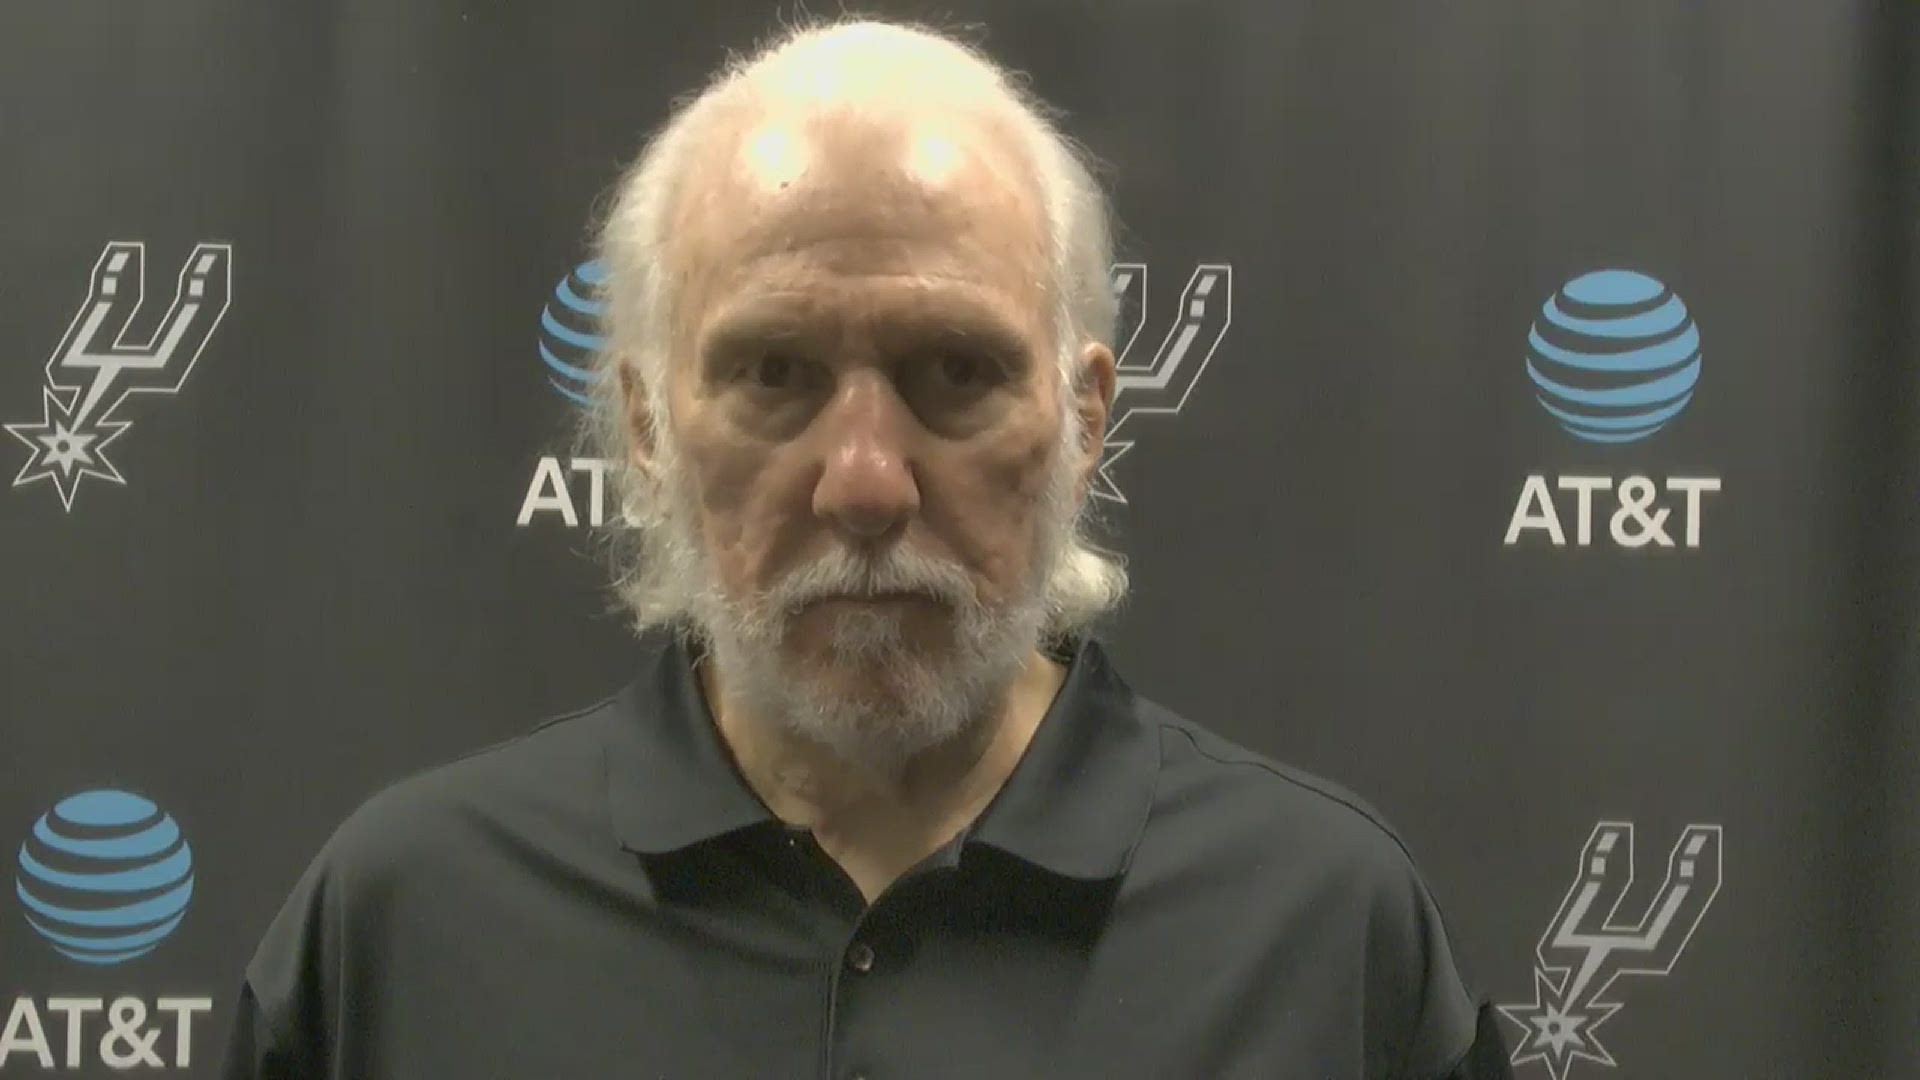 Popovich commended Devin Vassell and Trey Lyles for stepping up in an otherwise disappointing loss.